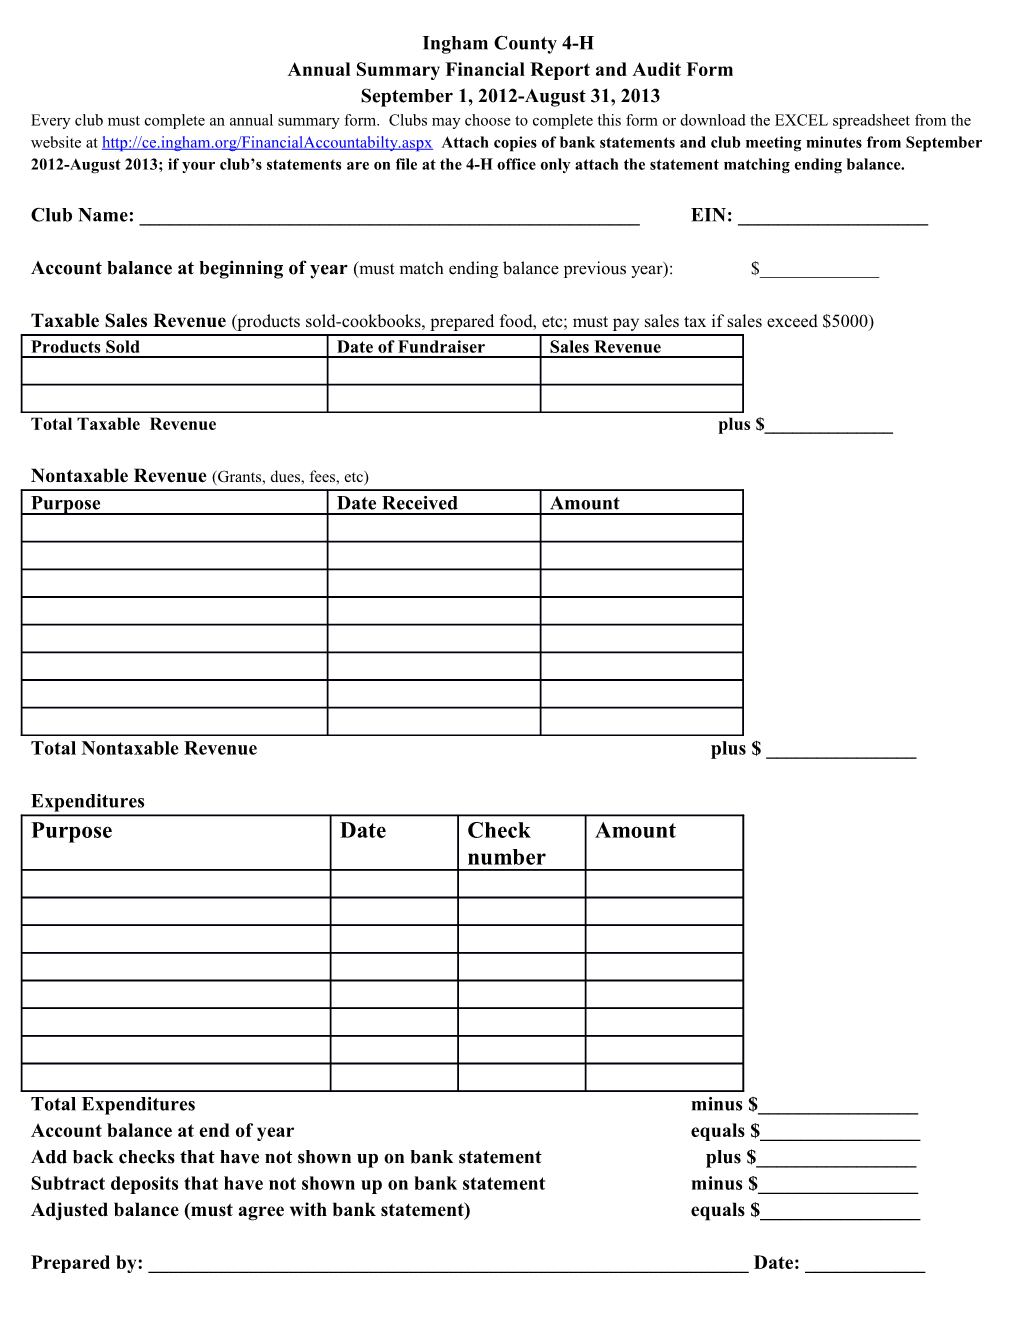 Annual Summary Financial Report and Audit Form